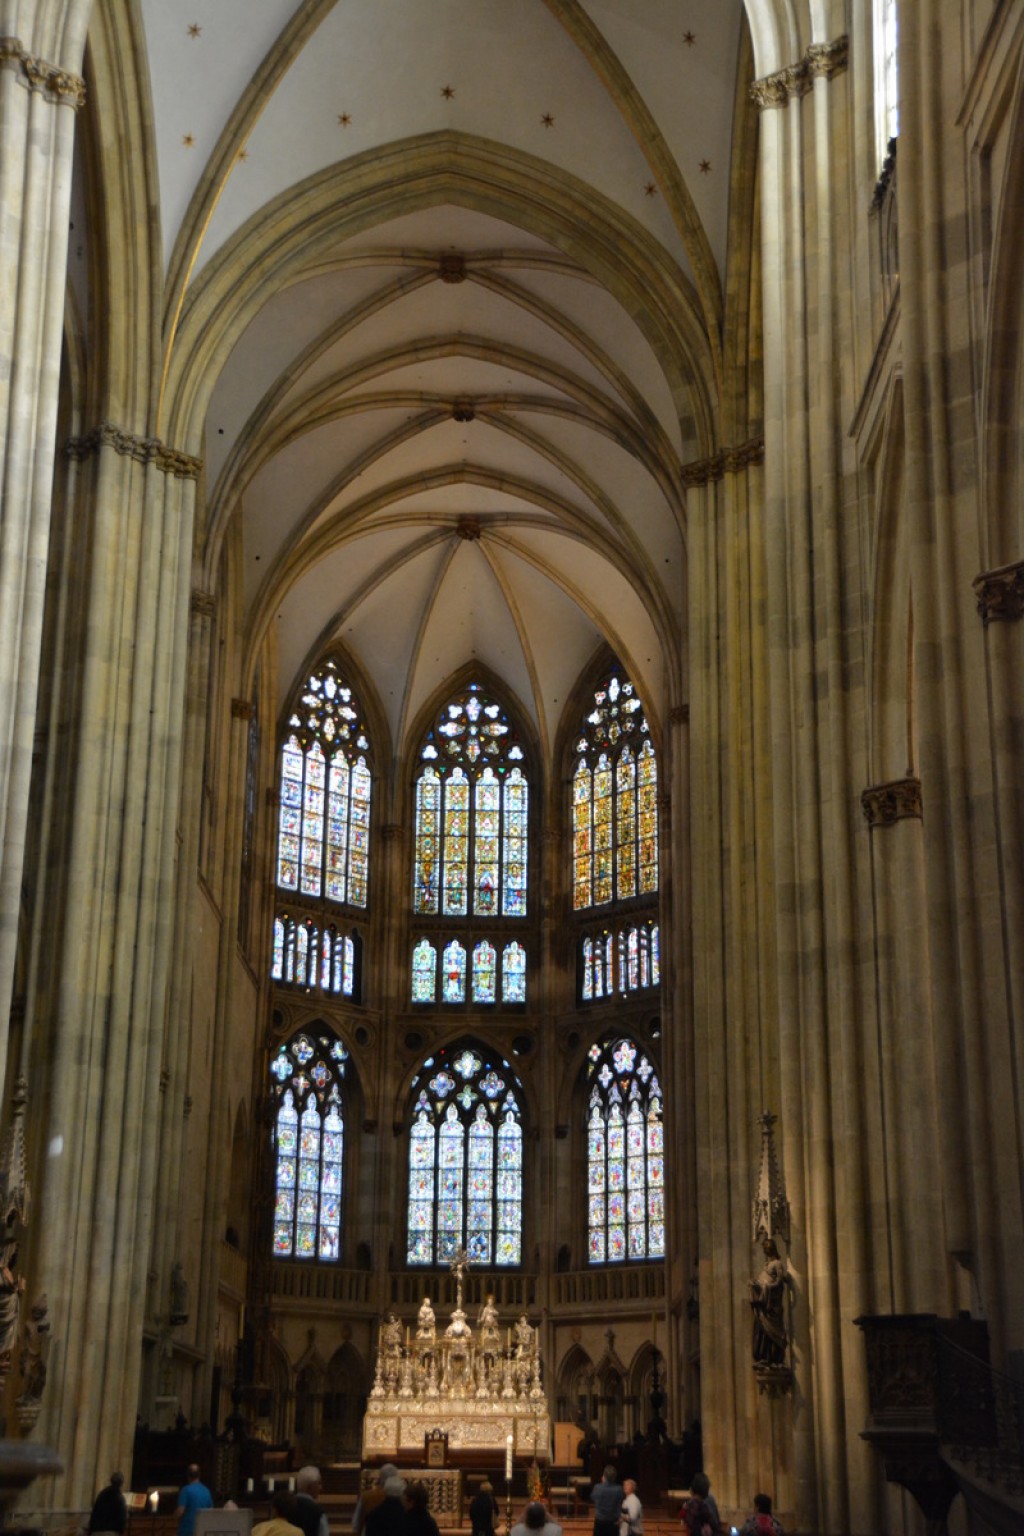 Staine glass of Regensburg Cathedral